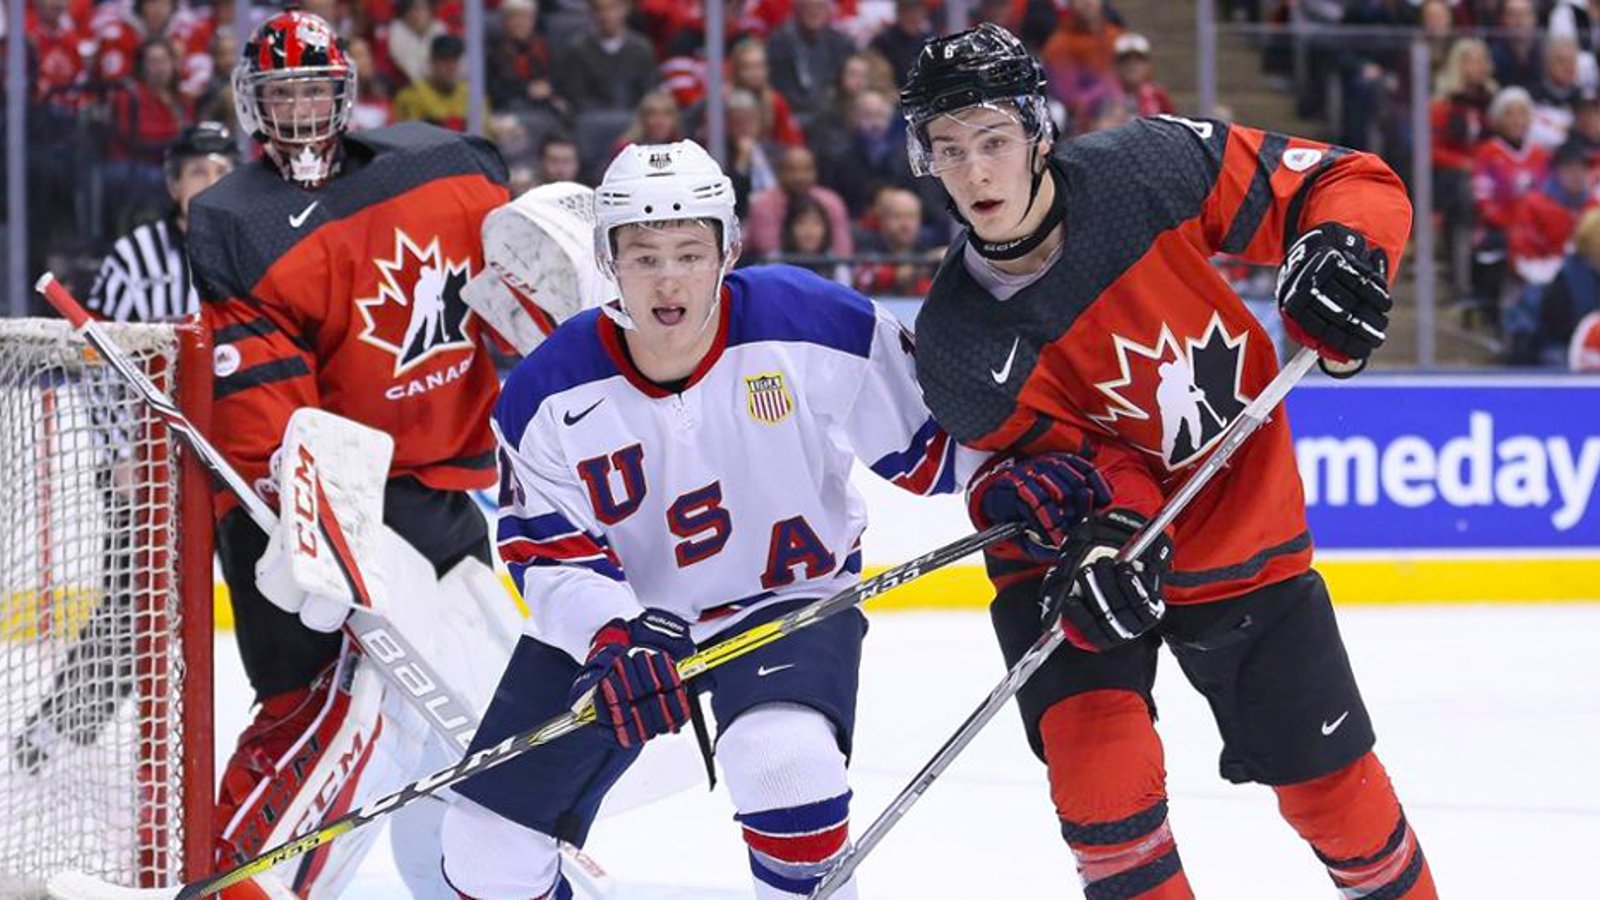 More than half a dozen players drop out of the World Junior Championships